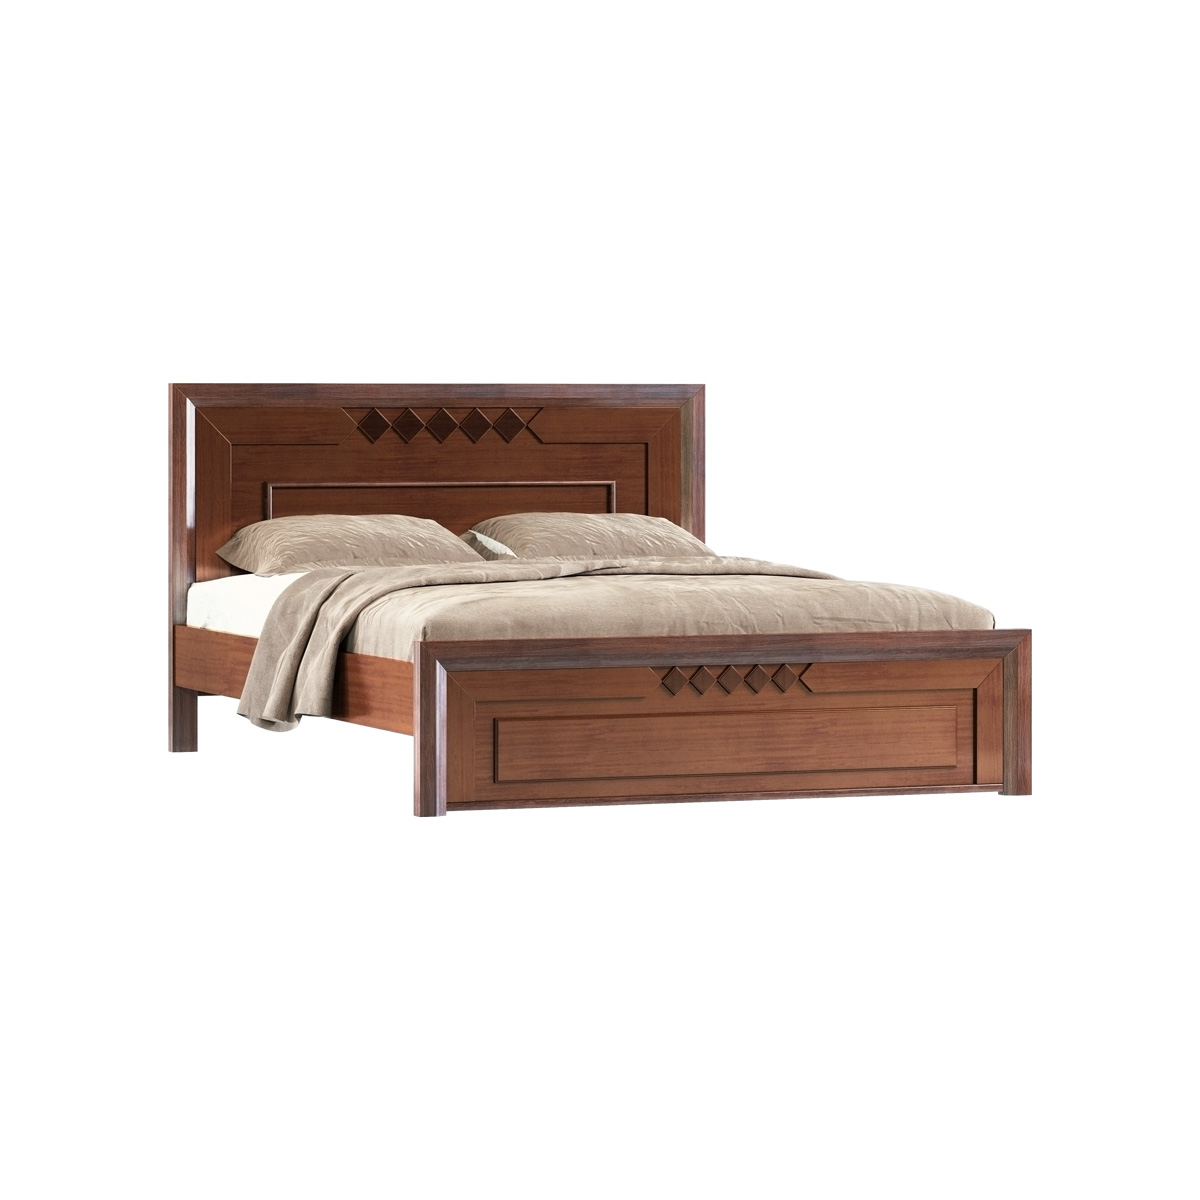 5 Star Wooden King bed I BDH-365-3-1-20